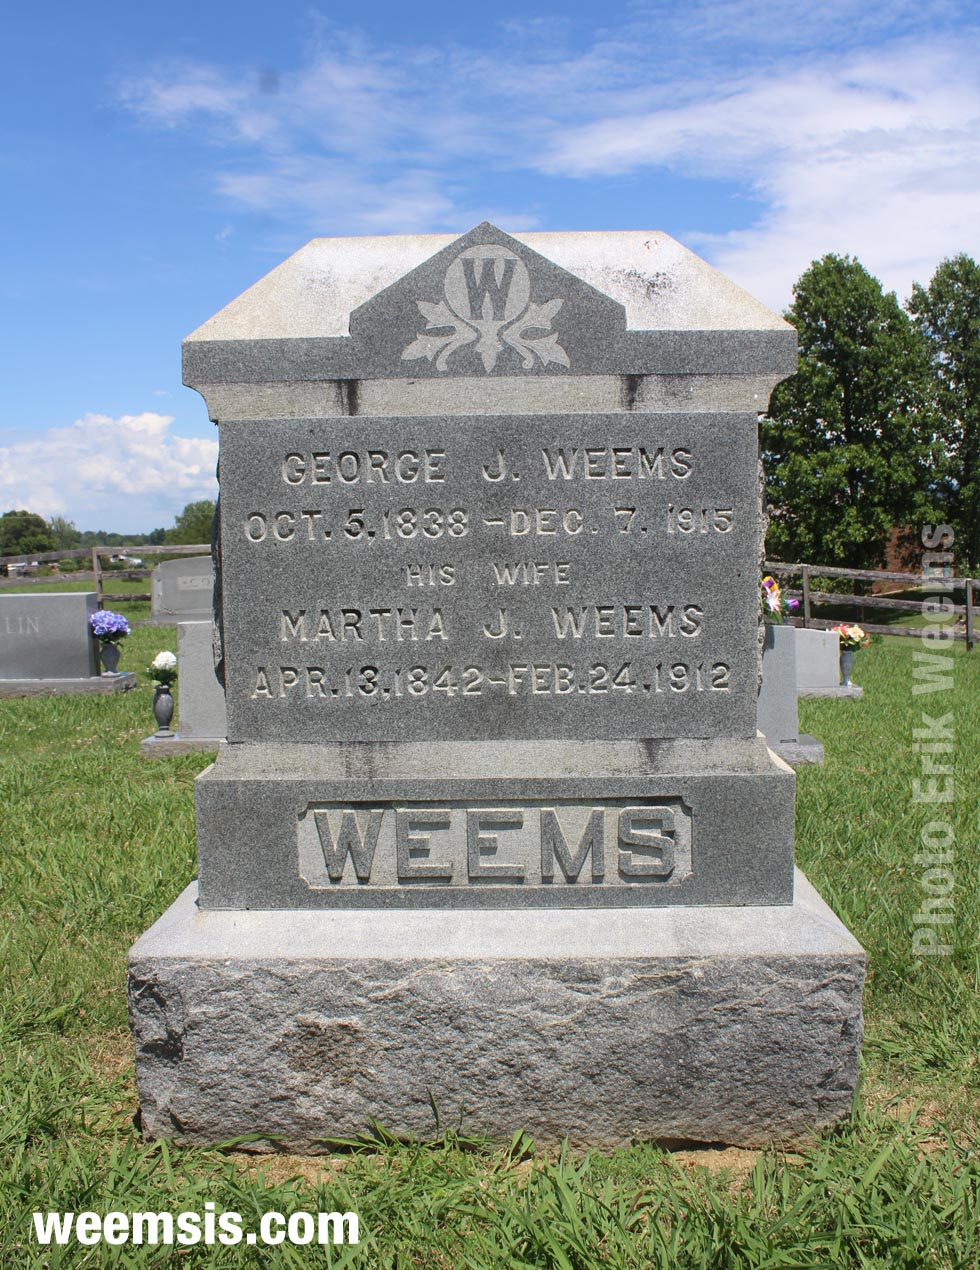 George Weems Gravestone marker at Weems Chapel in Tennessee